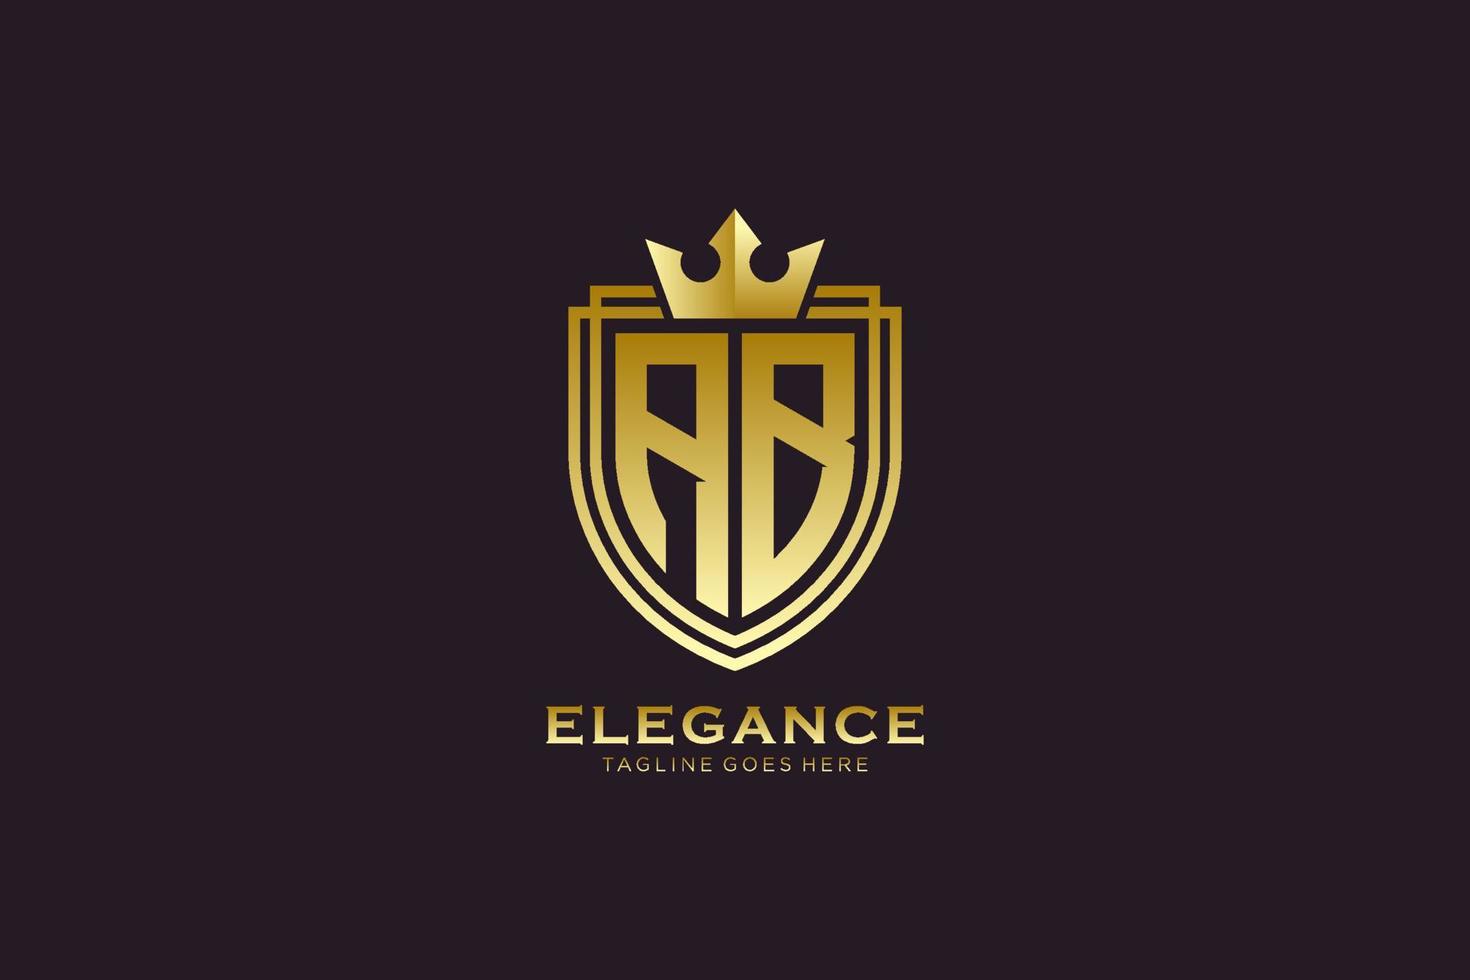 initial AB elegant luxury monogram logo or badge template with scrolls and royal crown - perfect for luxurious branding projects vector